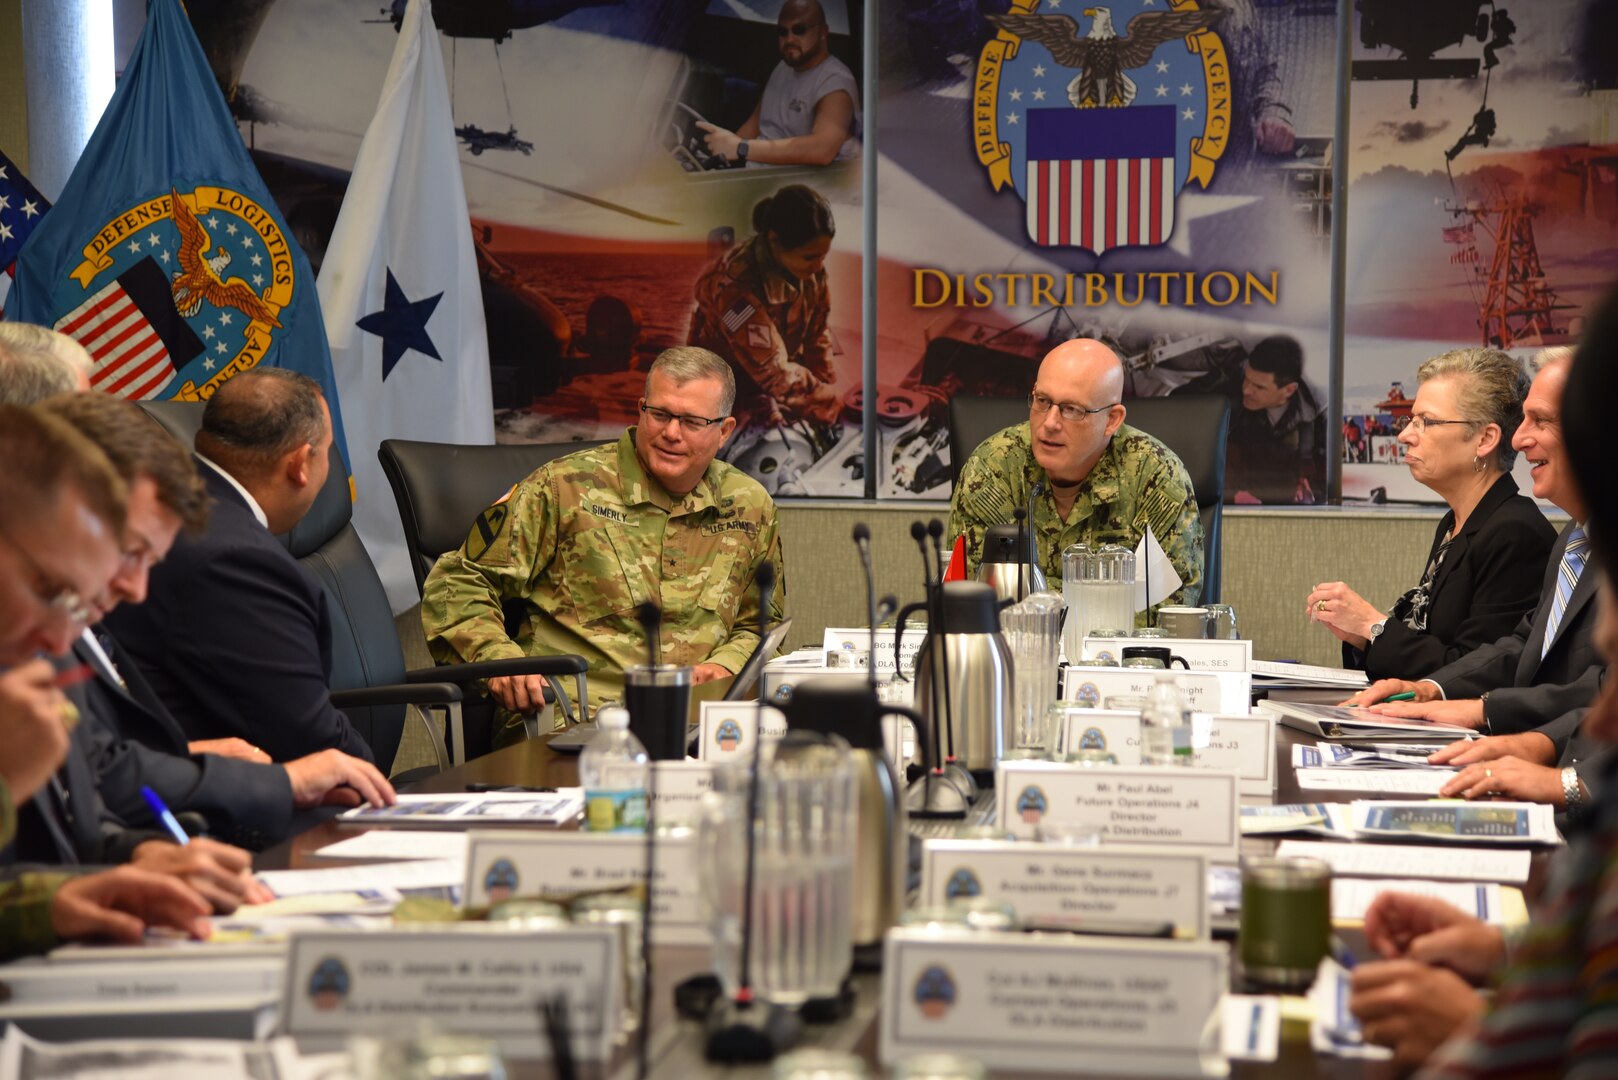 Troop Support commander meets with Distribution leadership